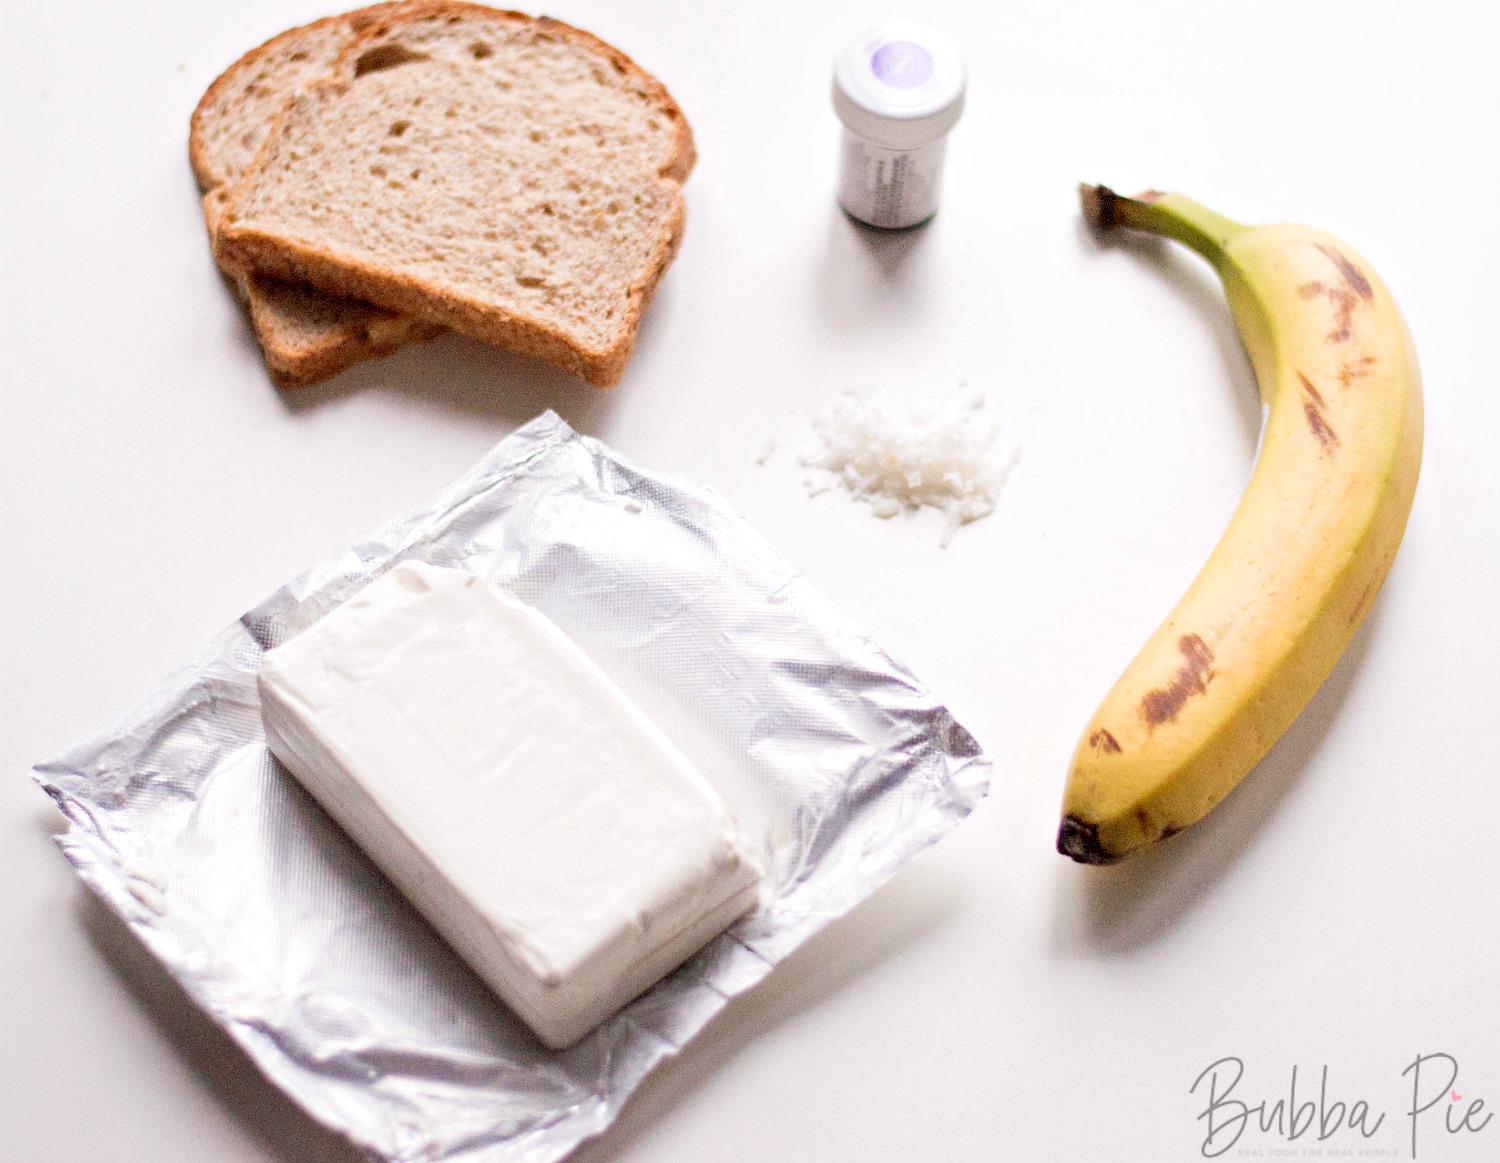 How to make mermaid toast includes cream cheese, banana, food coloring and coconut flakes